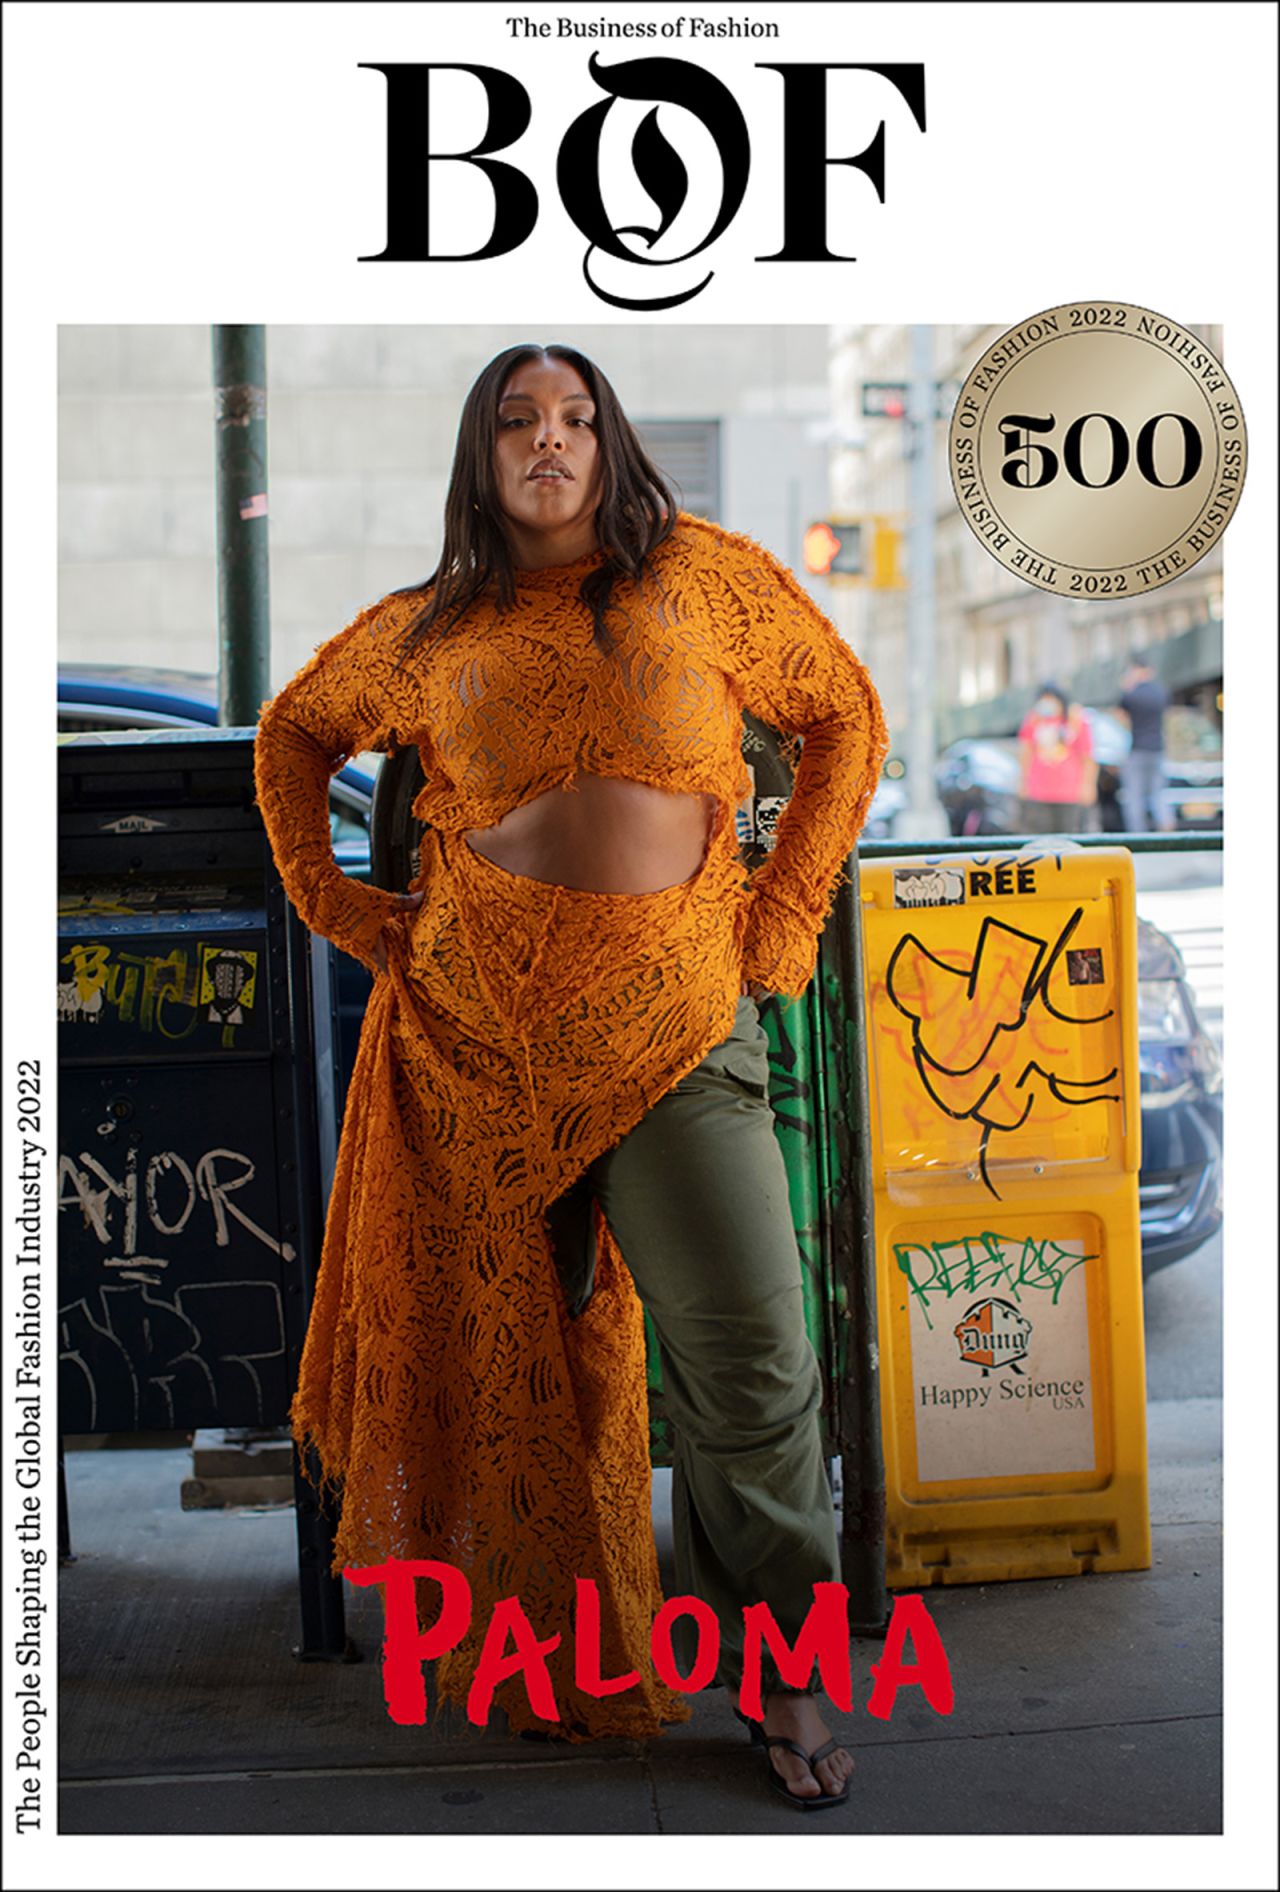 Paloma Elsesser has been a member of the BoF 500 since 2018.